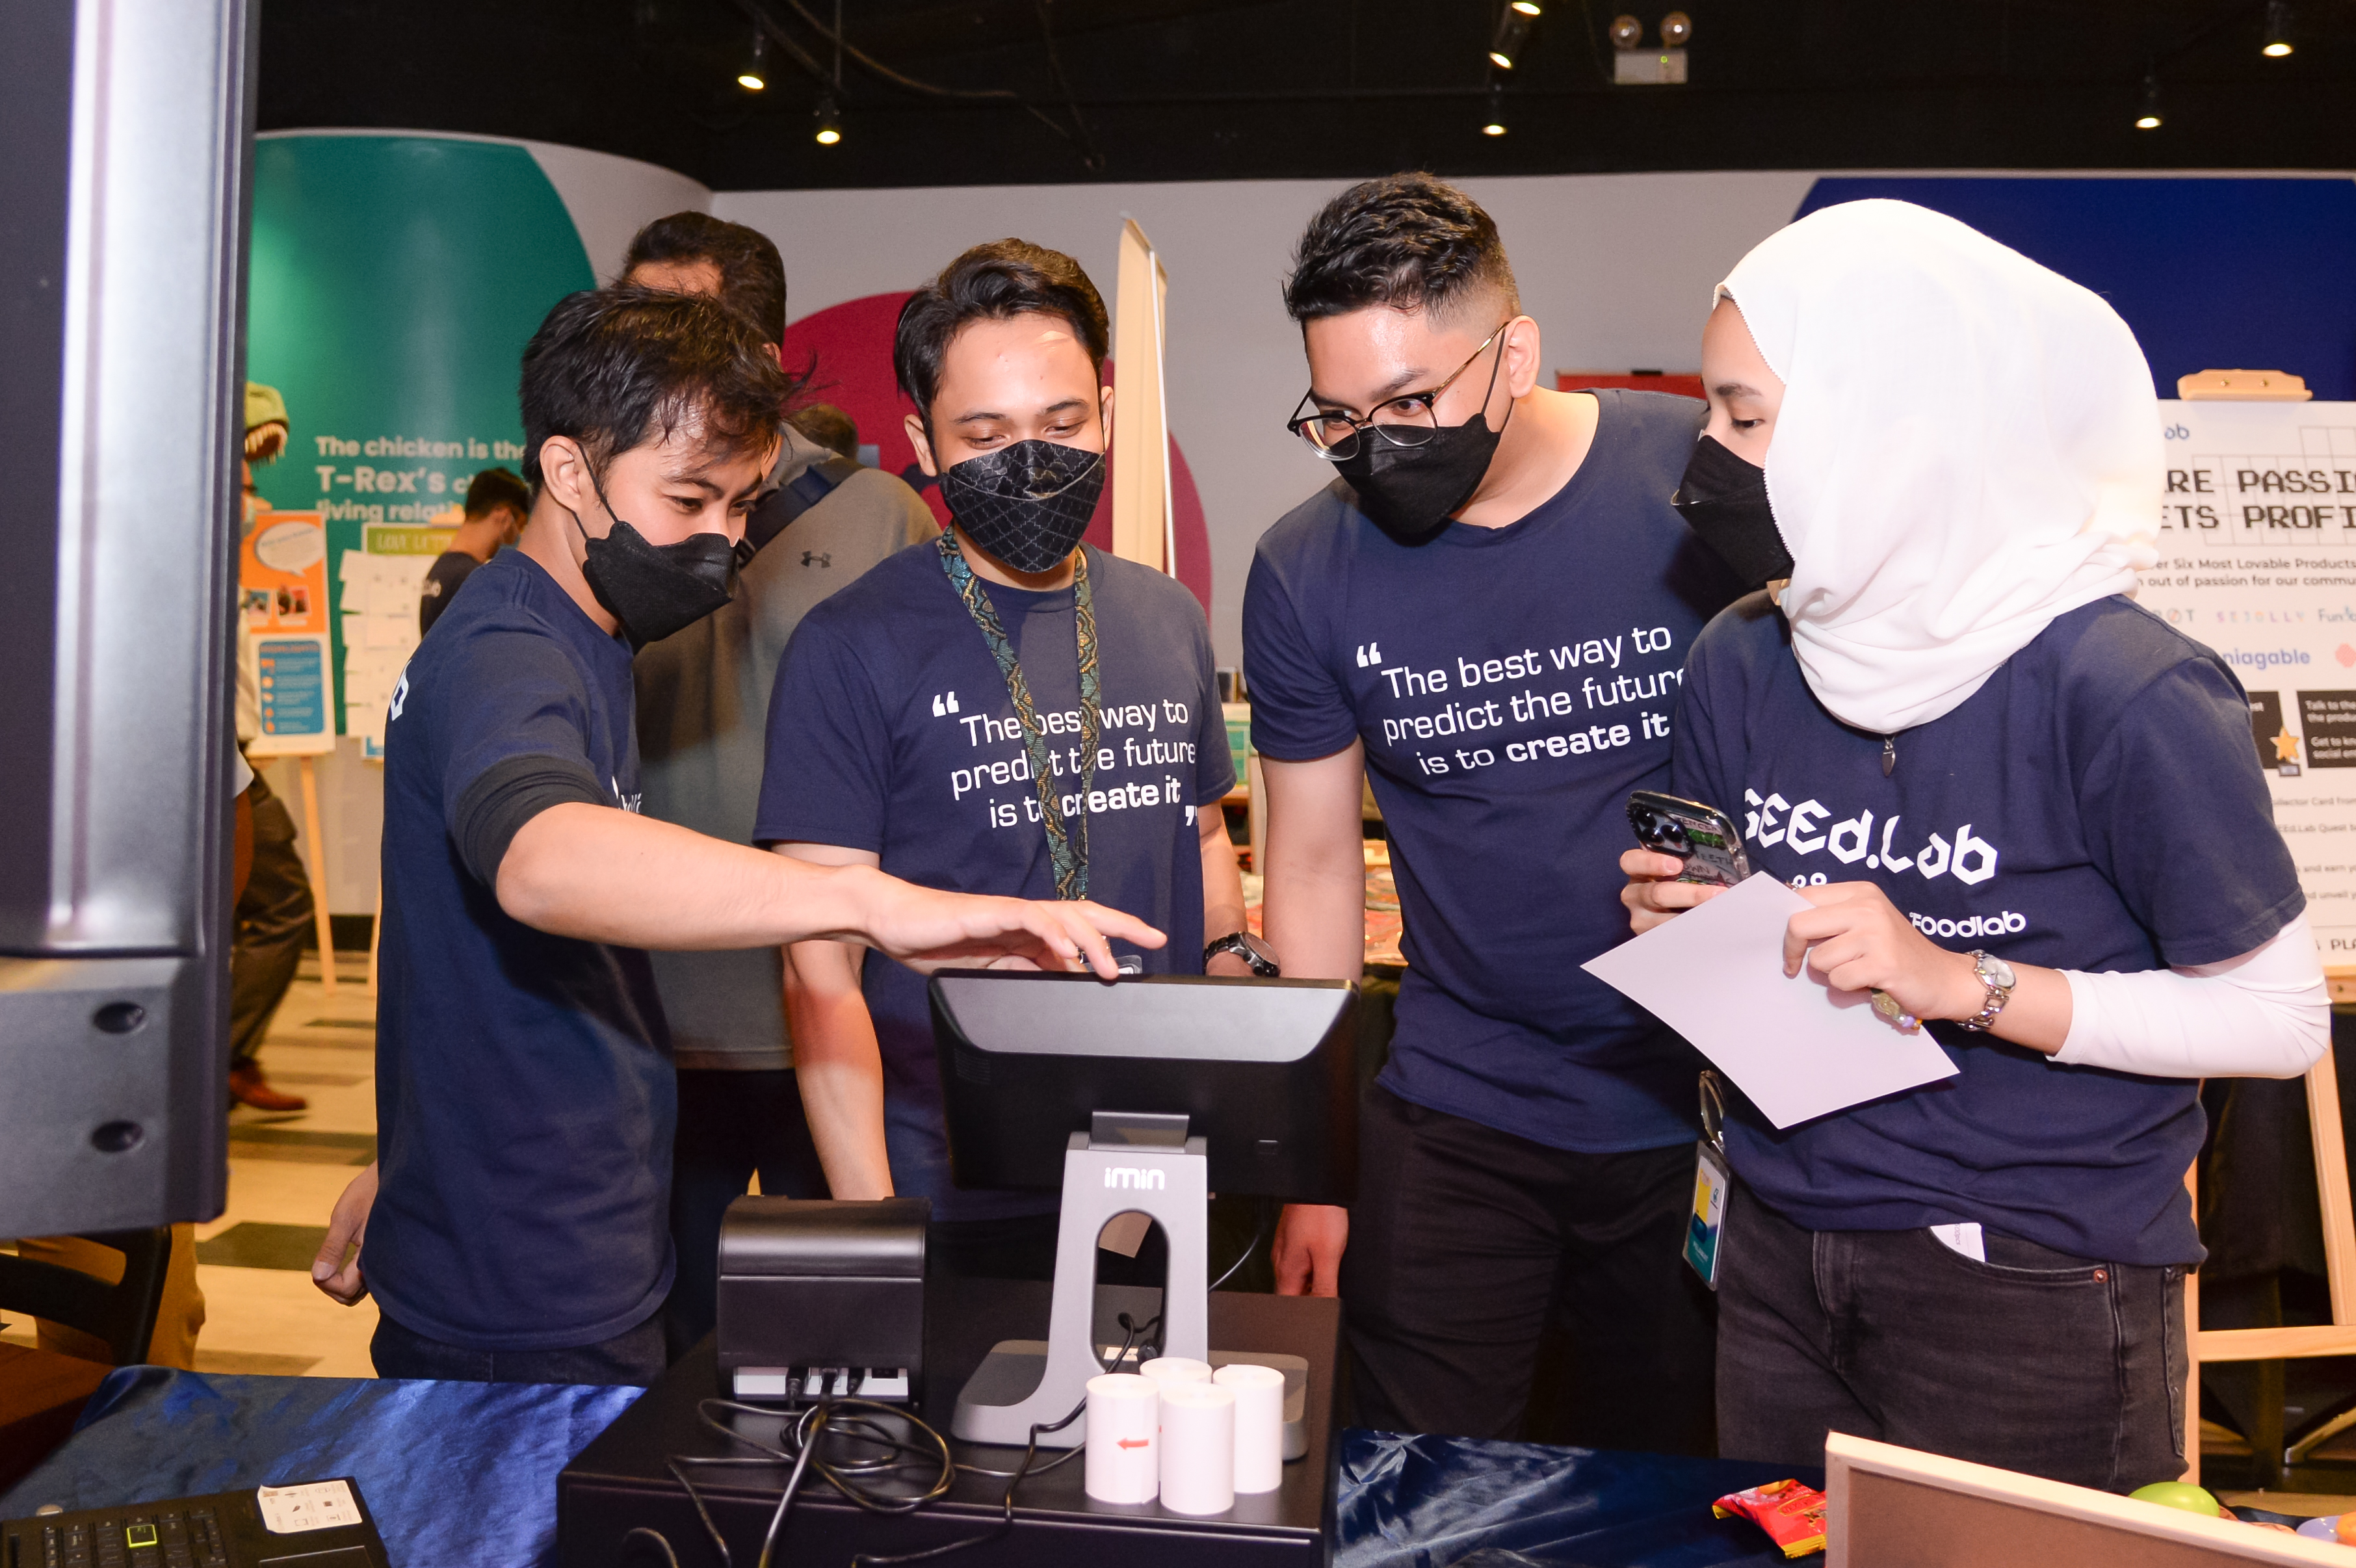 Niagable, one of the six social enterprises from SEEd.Lab's second cohort, showcases solutions in addressing social painpoints in Malaysia.